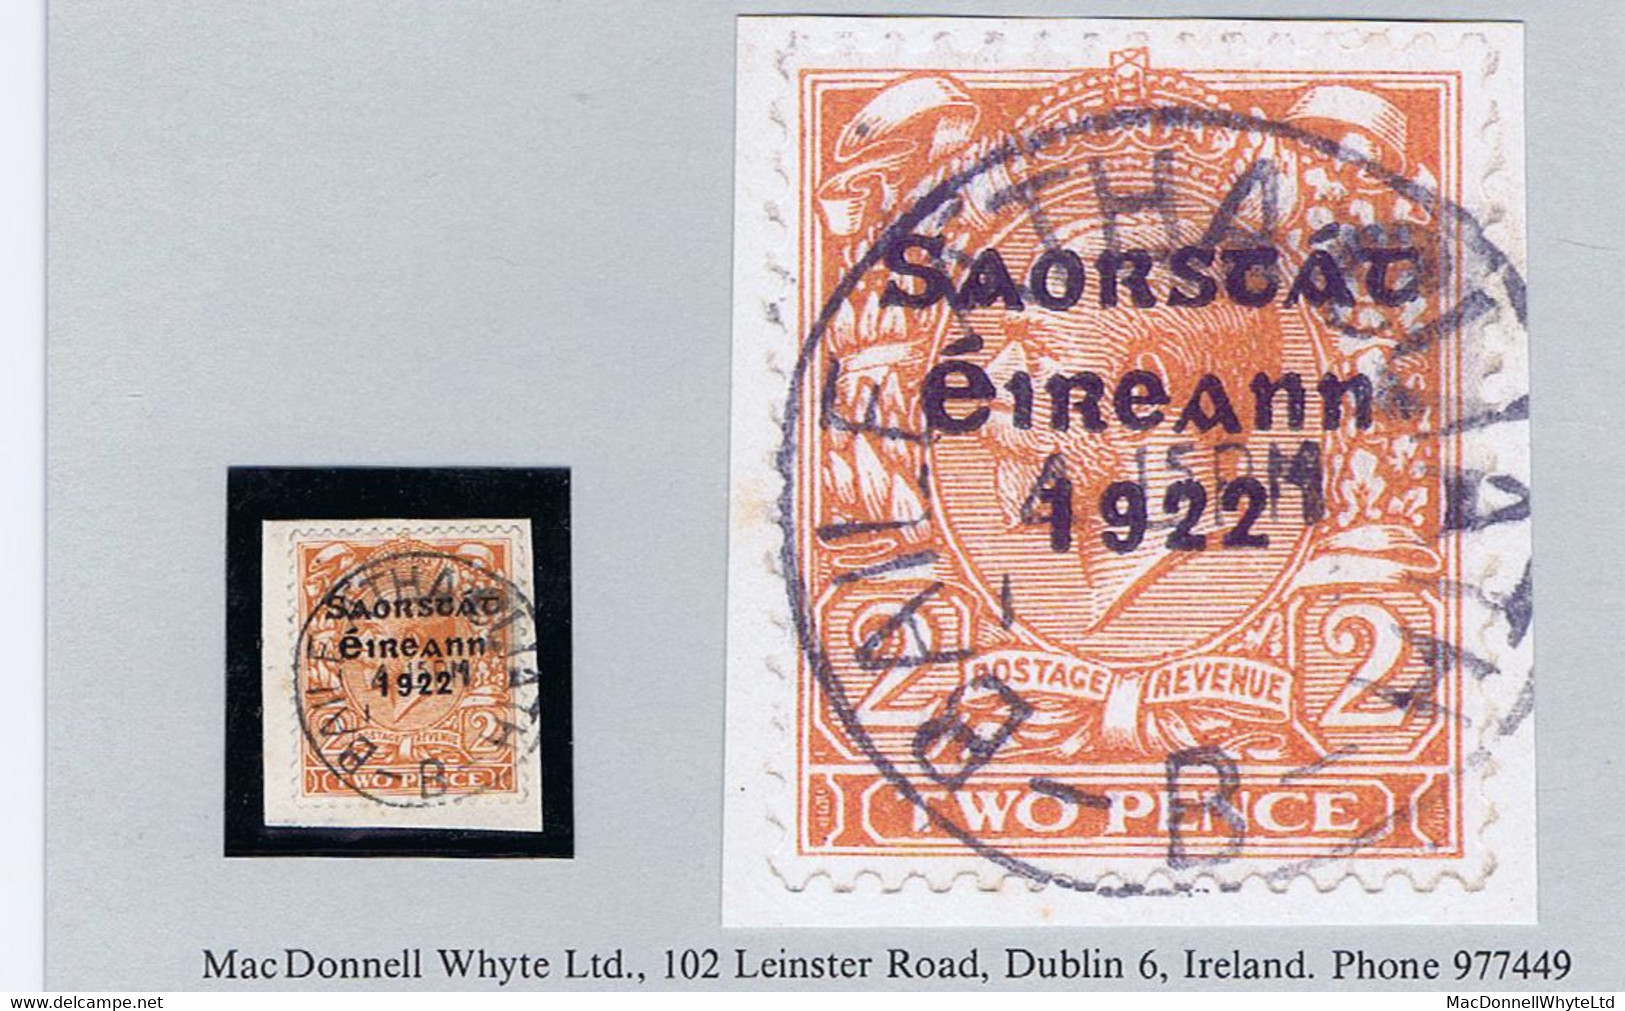 Ireland 1923 Harrison Saorstat Coils, 2d Orange Used On Piece, BAILE ATHA CLIATH With Date Apparently Missing - Gebruikt